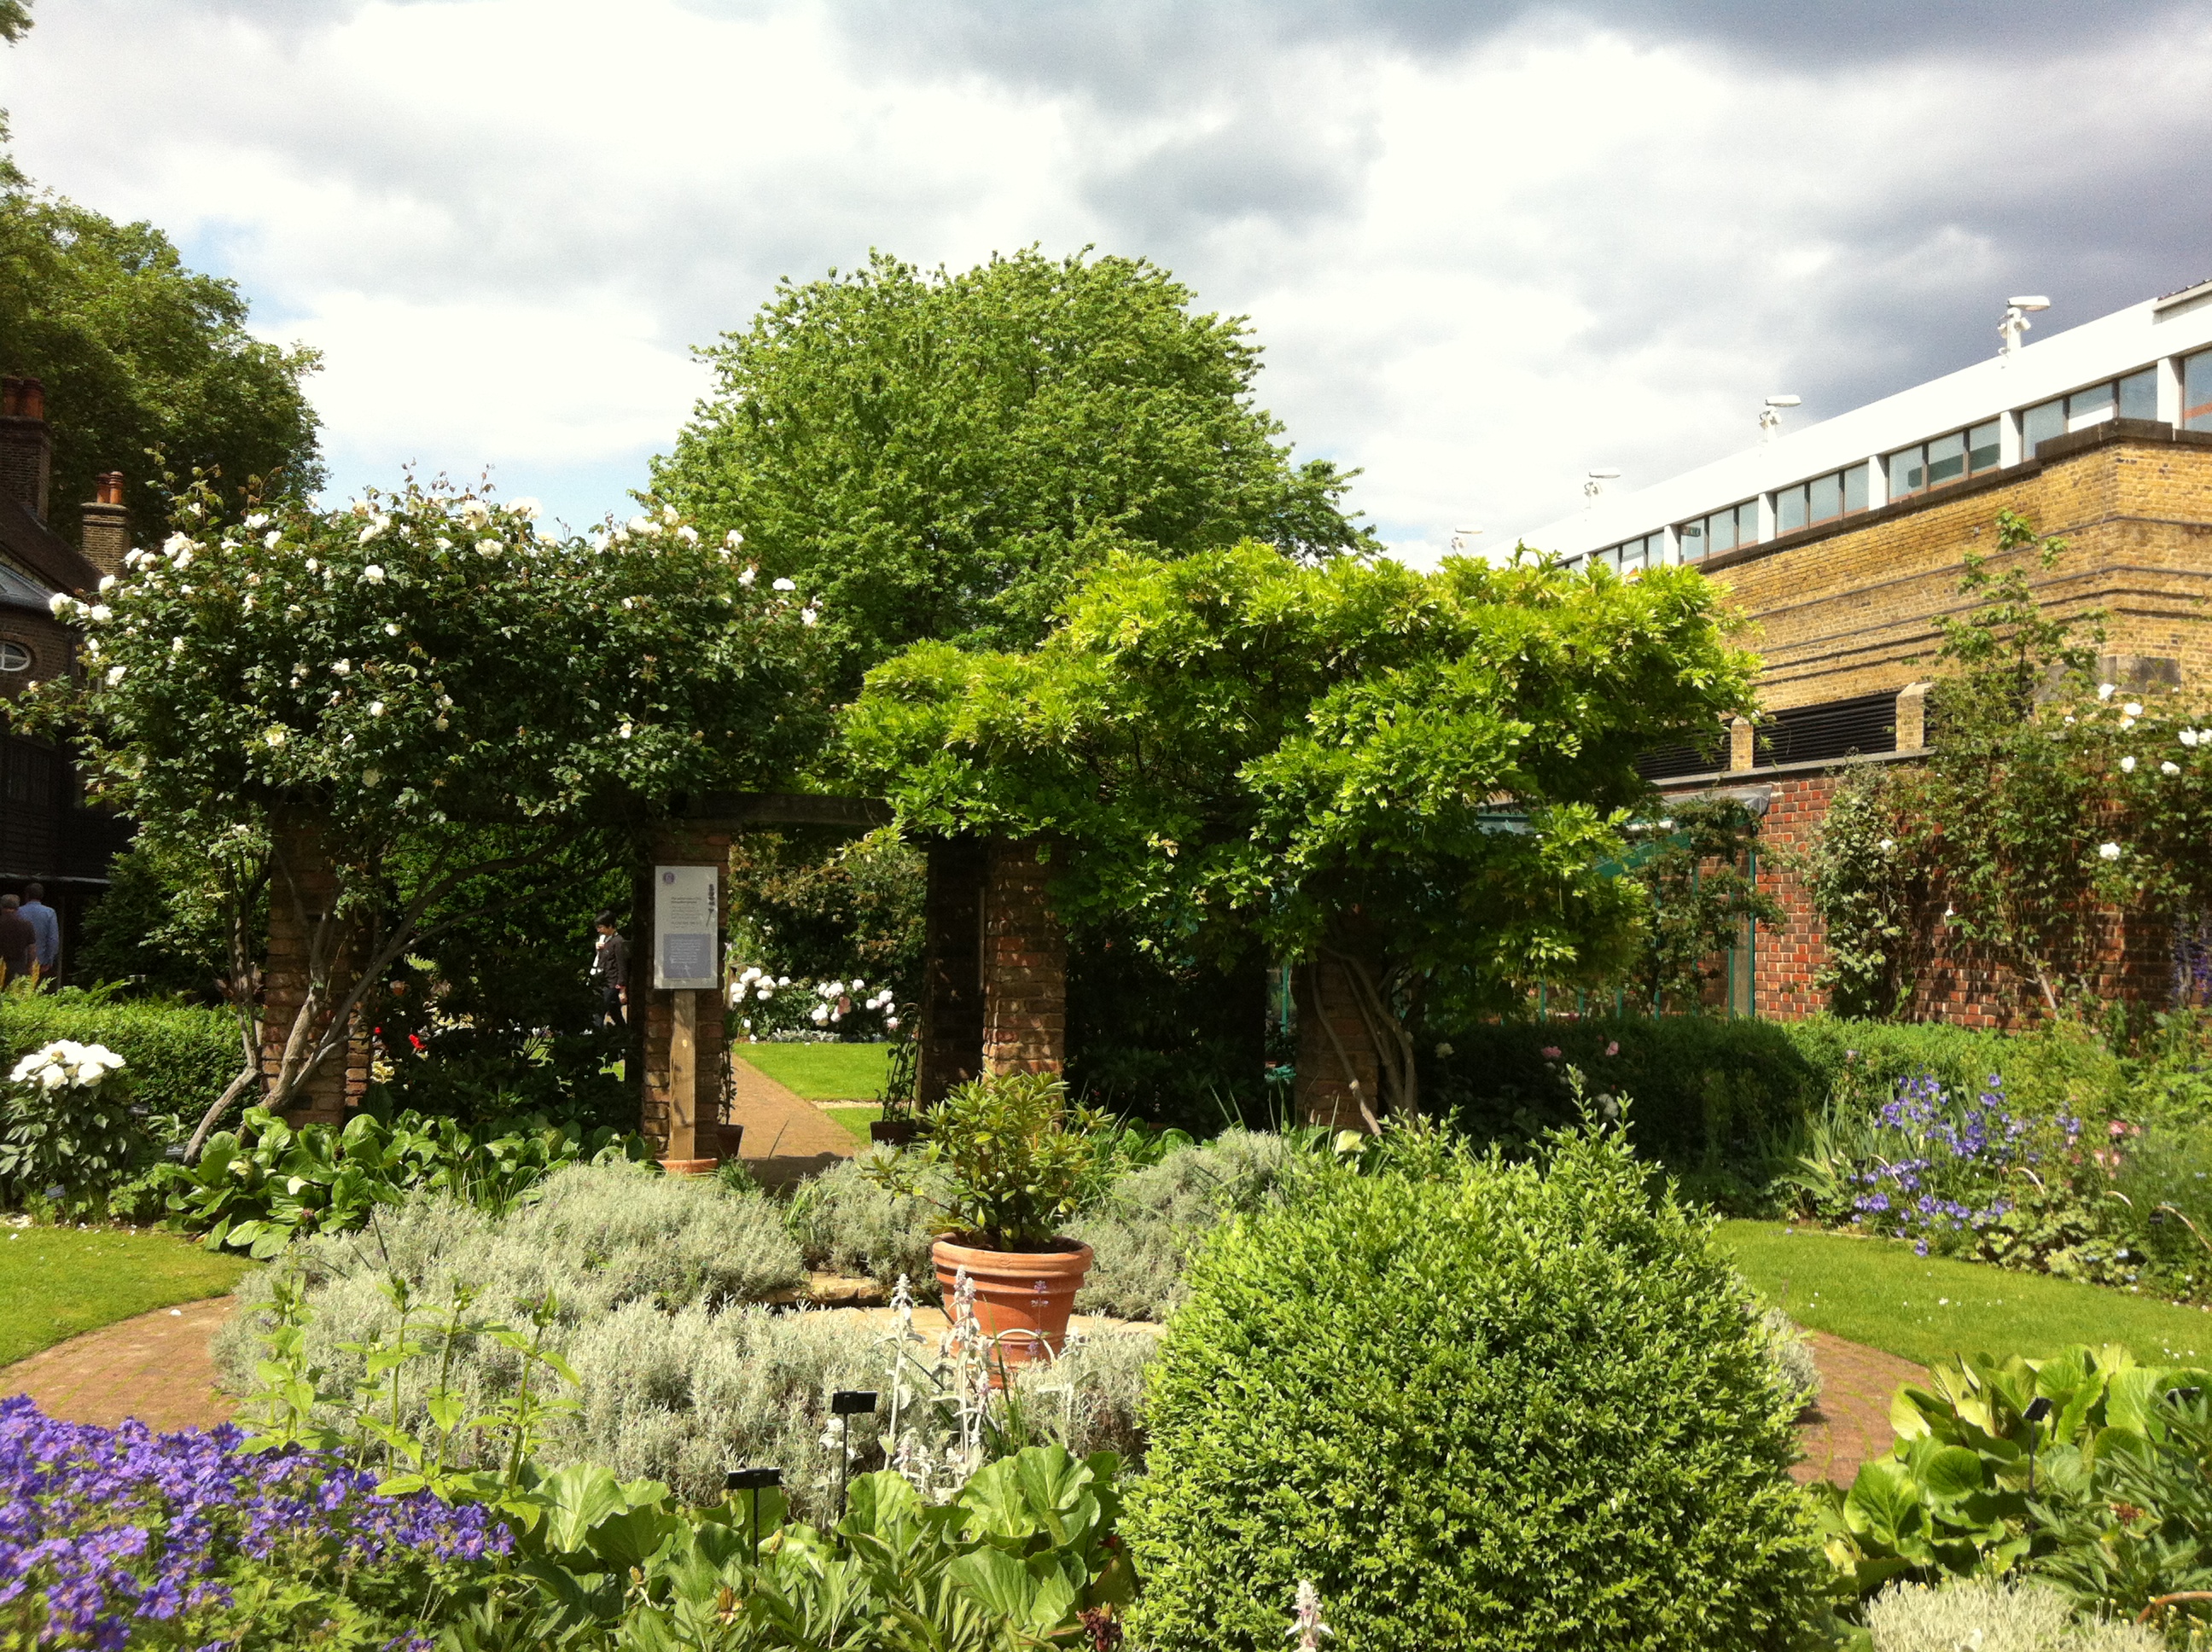 The gardens of the Geffrye Museum, London